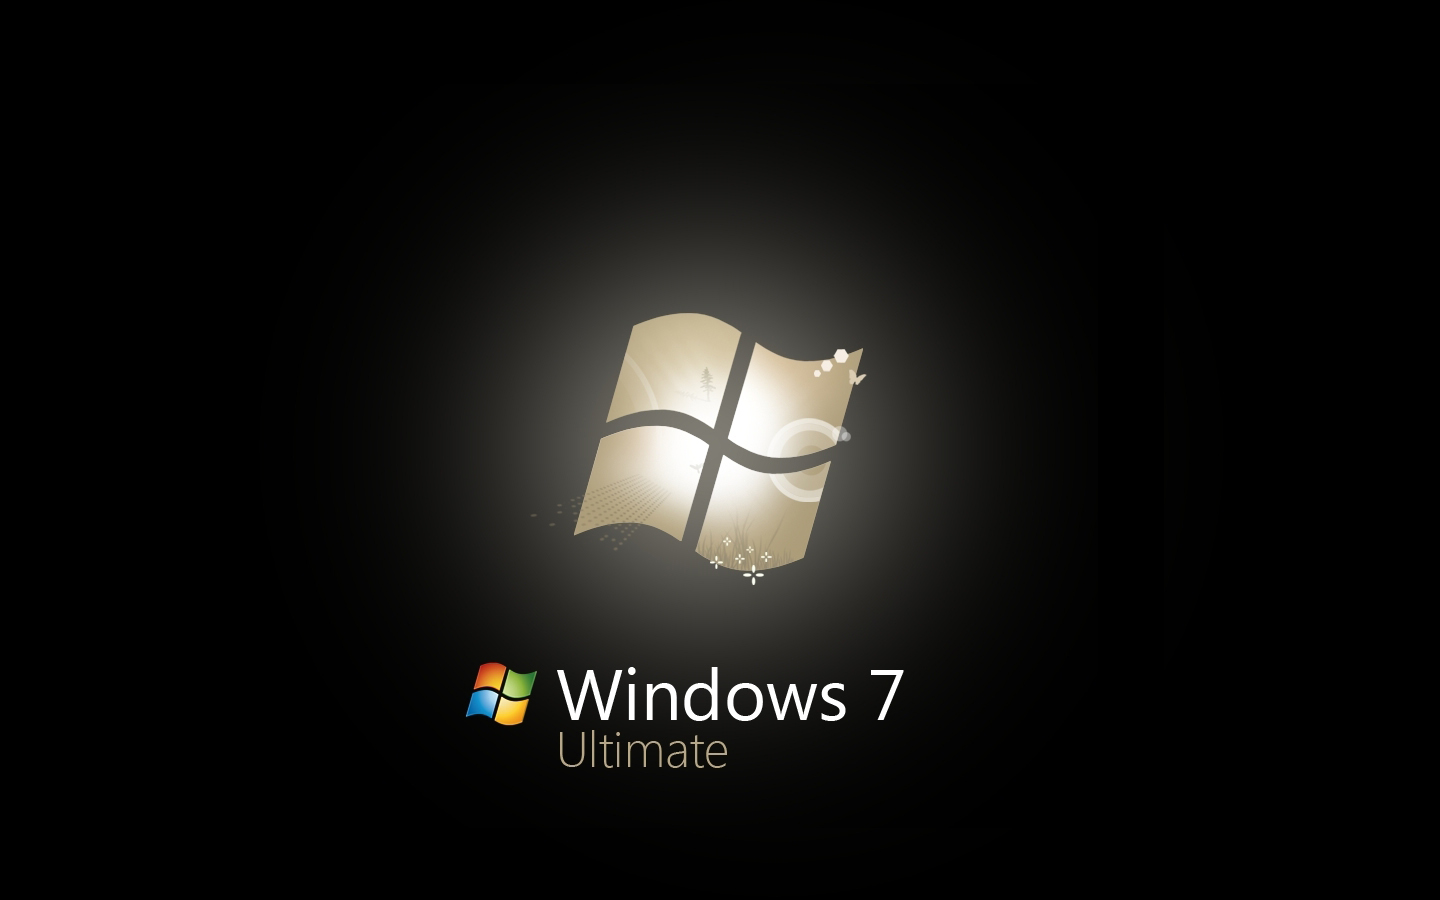 Windows 7 Ultimate Black Edition Free Backgrounds